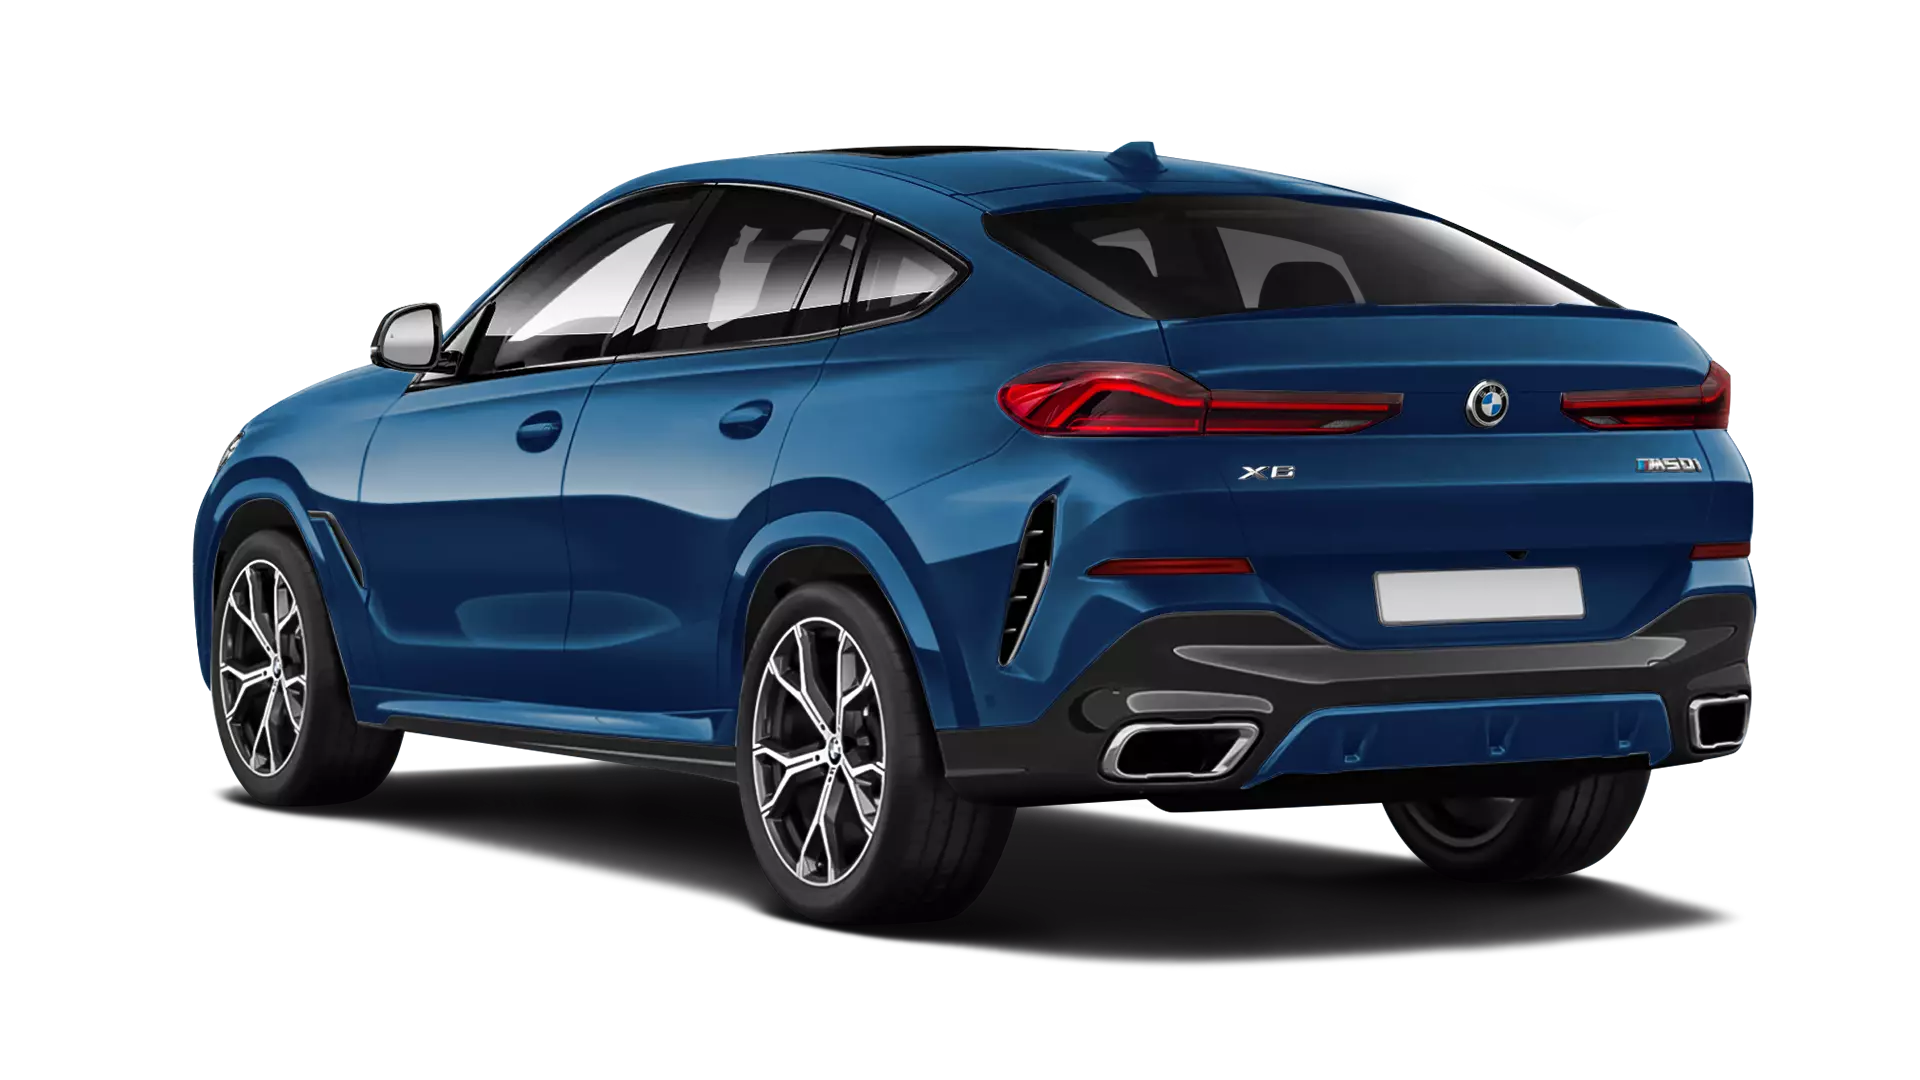 BMW X6 rear front view in phytonic blue